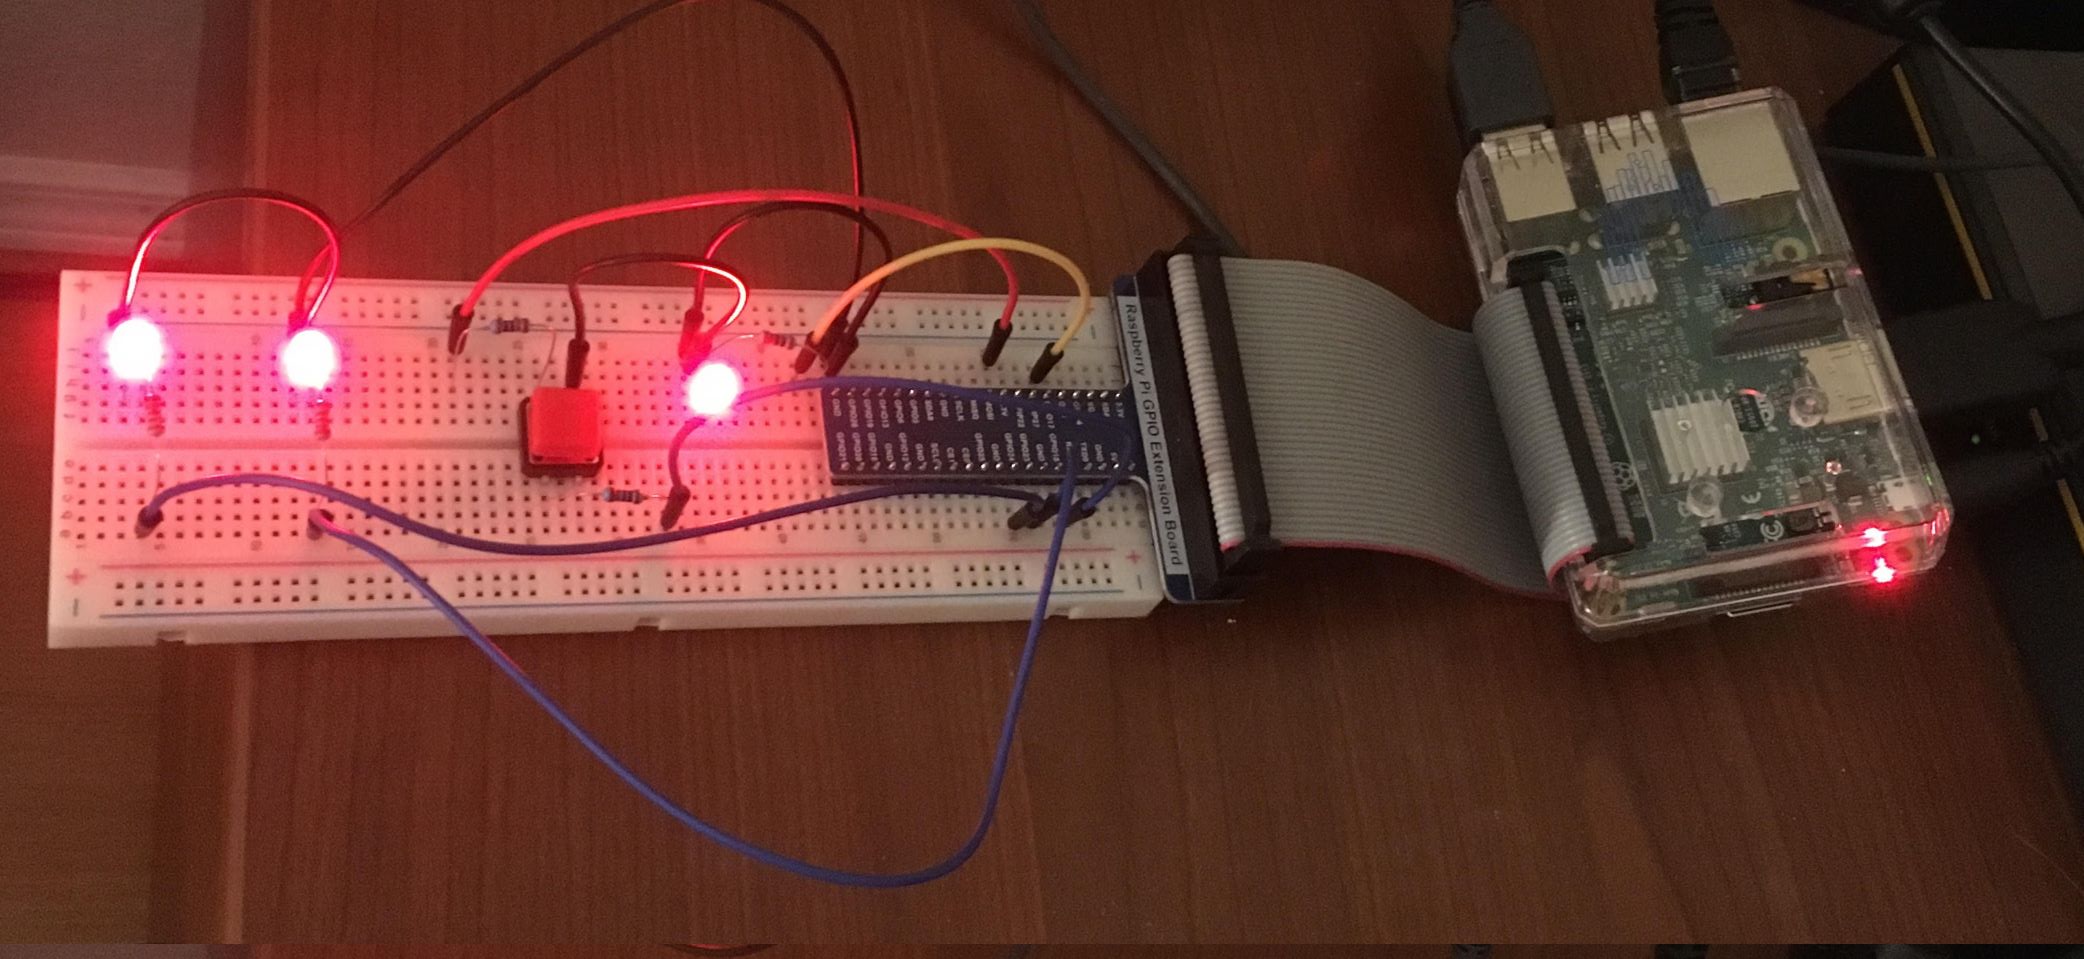 Raspberry Pi Science Project